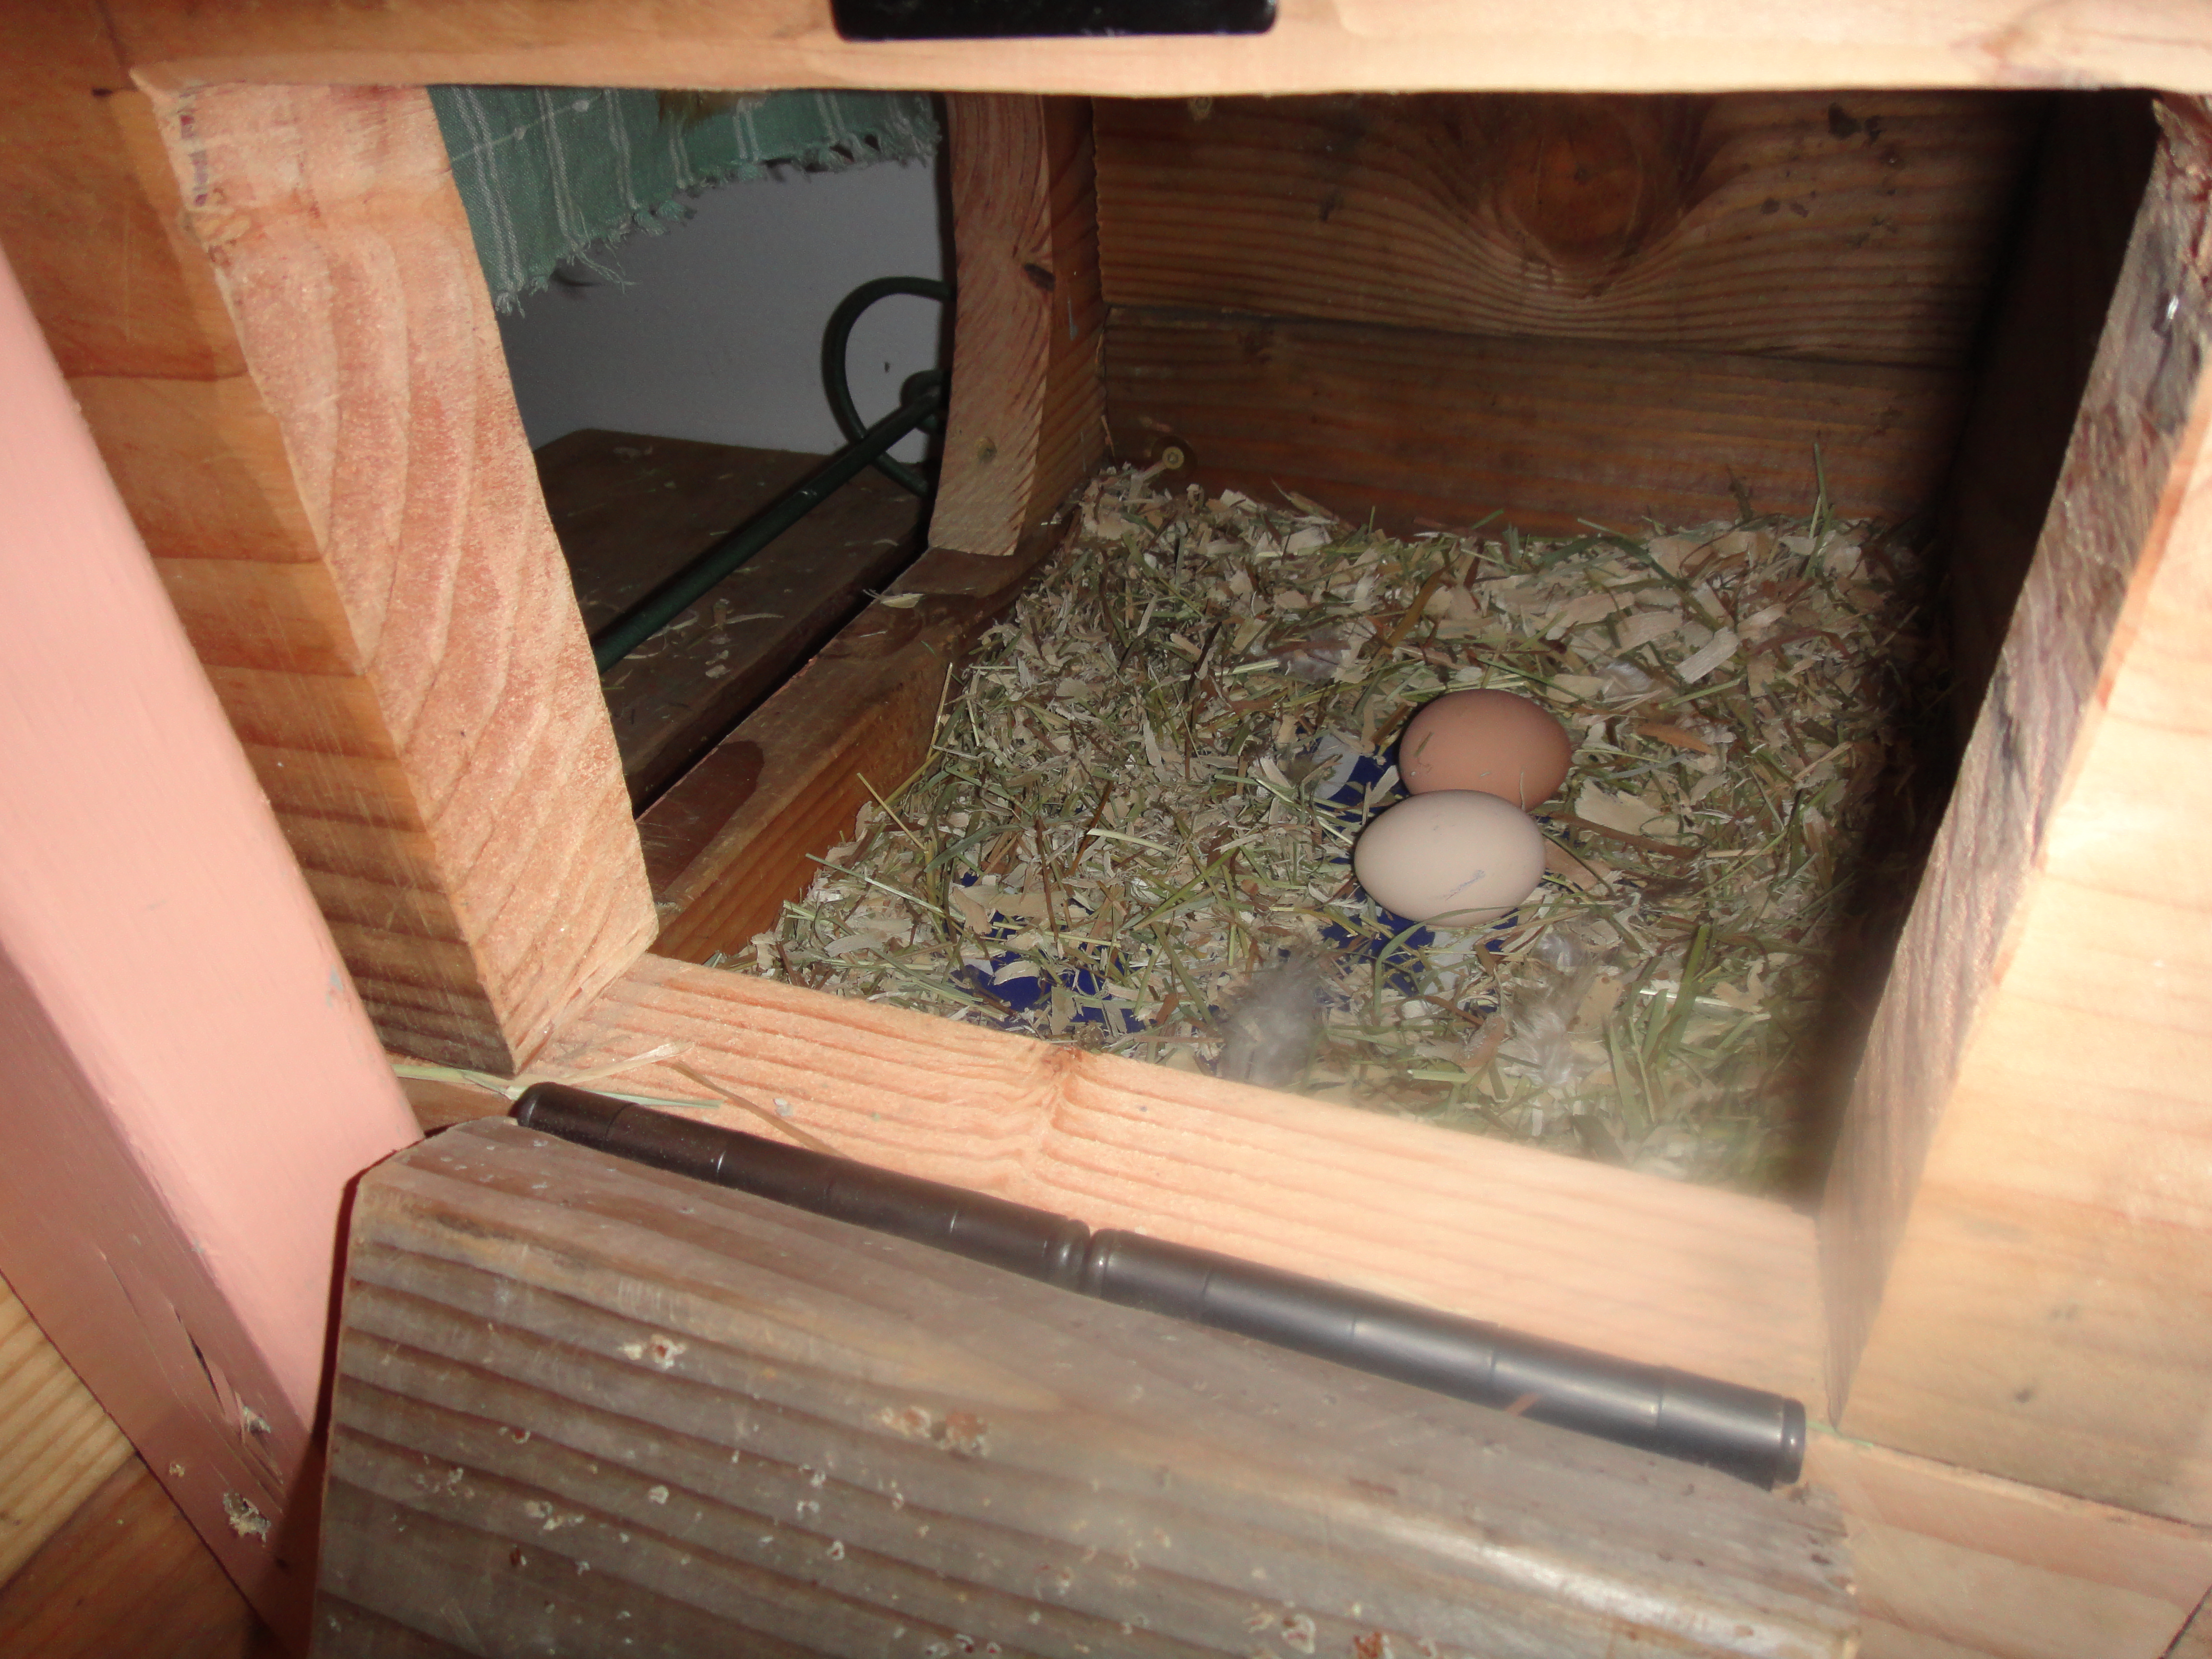 Thursday May 17th OMG they finally laid their eggs in the nest box together = SUCCESS!